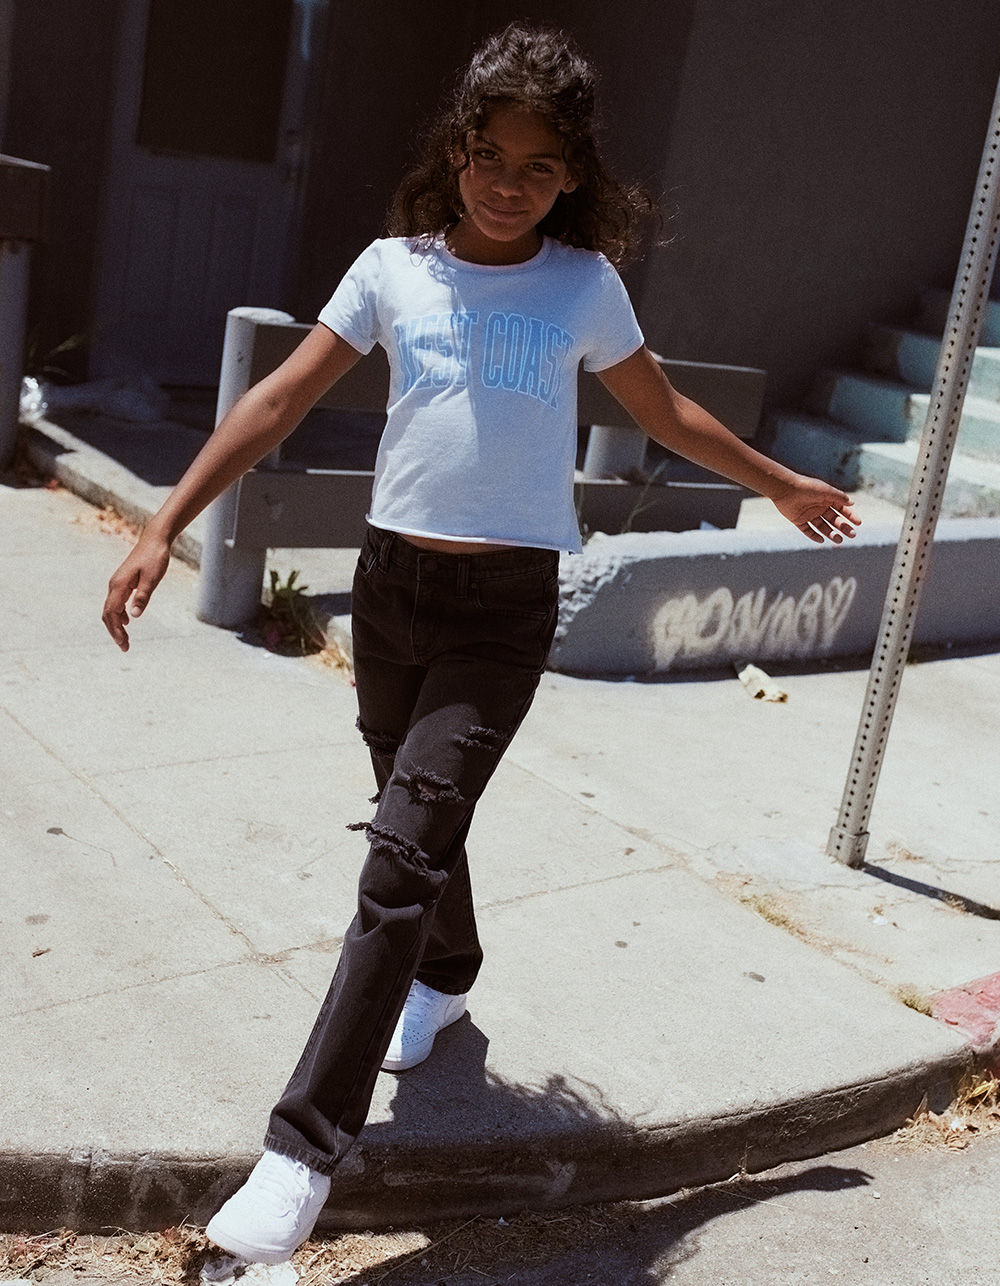 RSQ Girls High Rise 90's Jeans - WASHED BLACK | Tillys